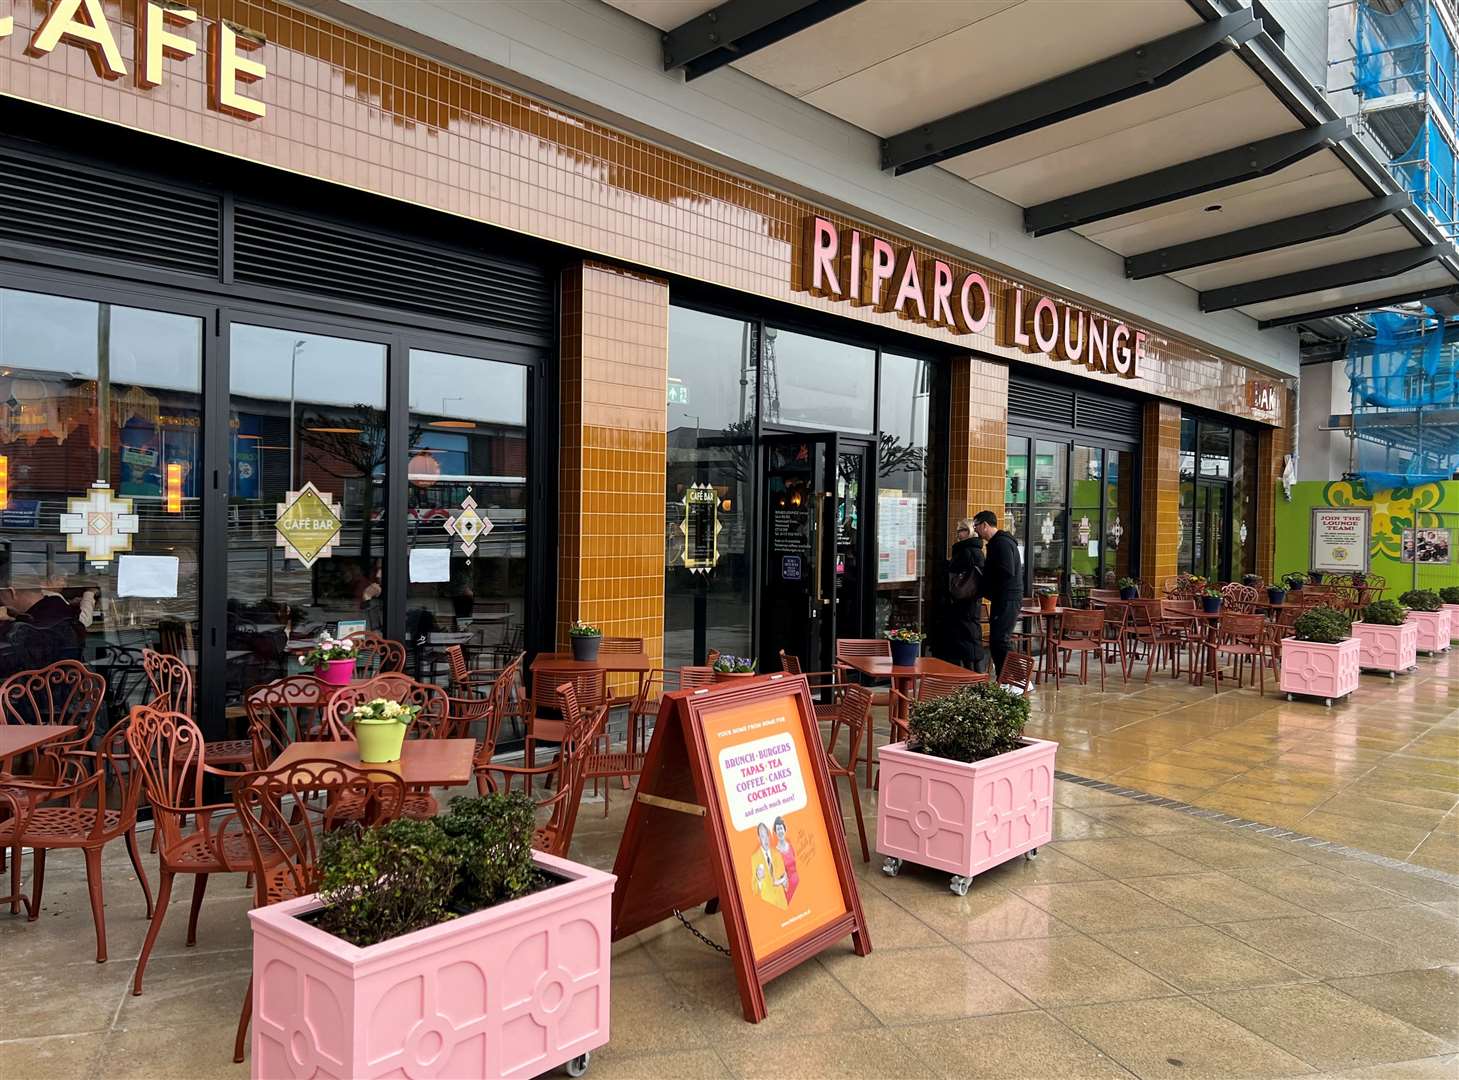 The Riparo Lounge at Westwood Cross has proved a hit